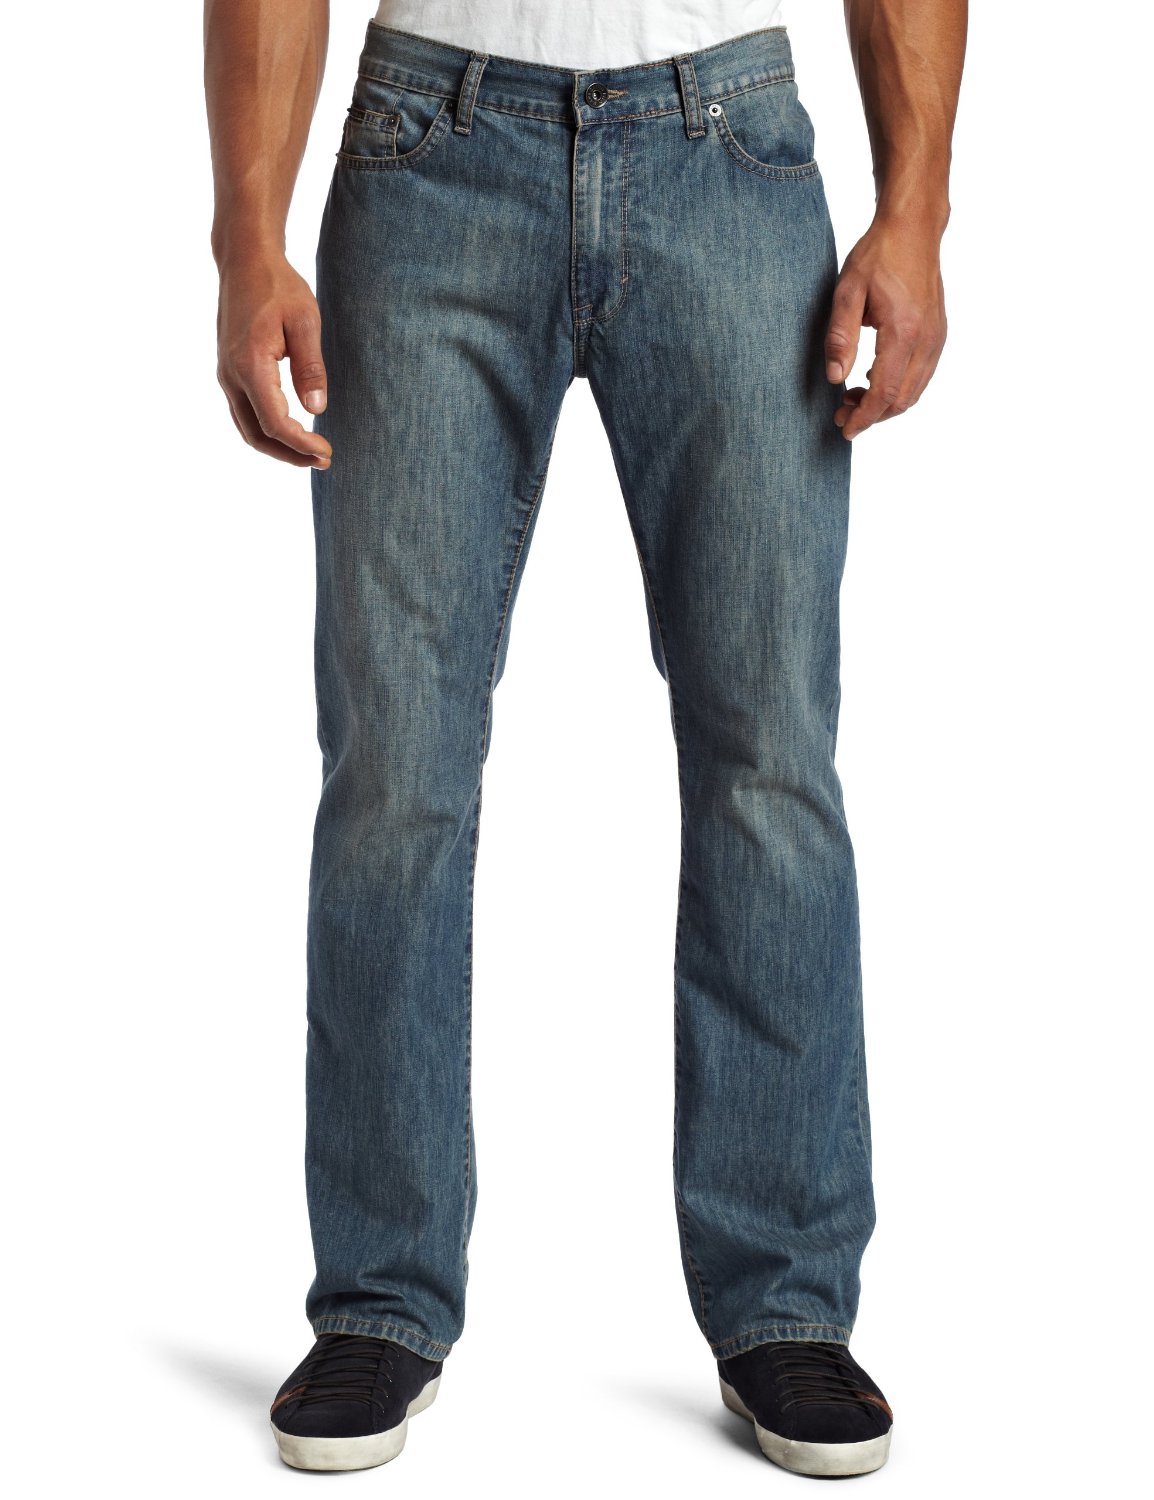 Imported Quality Jeans and T-Shirt for supply in Shop cheap | ClickBD